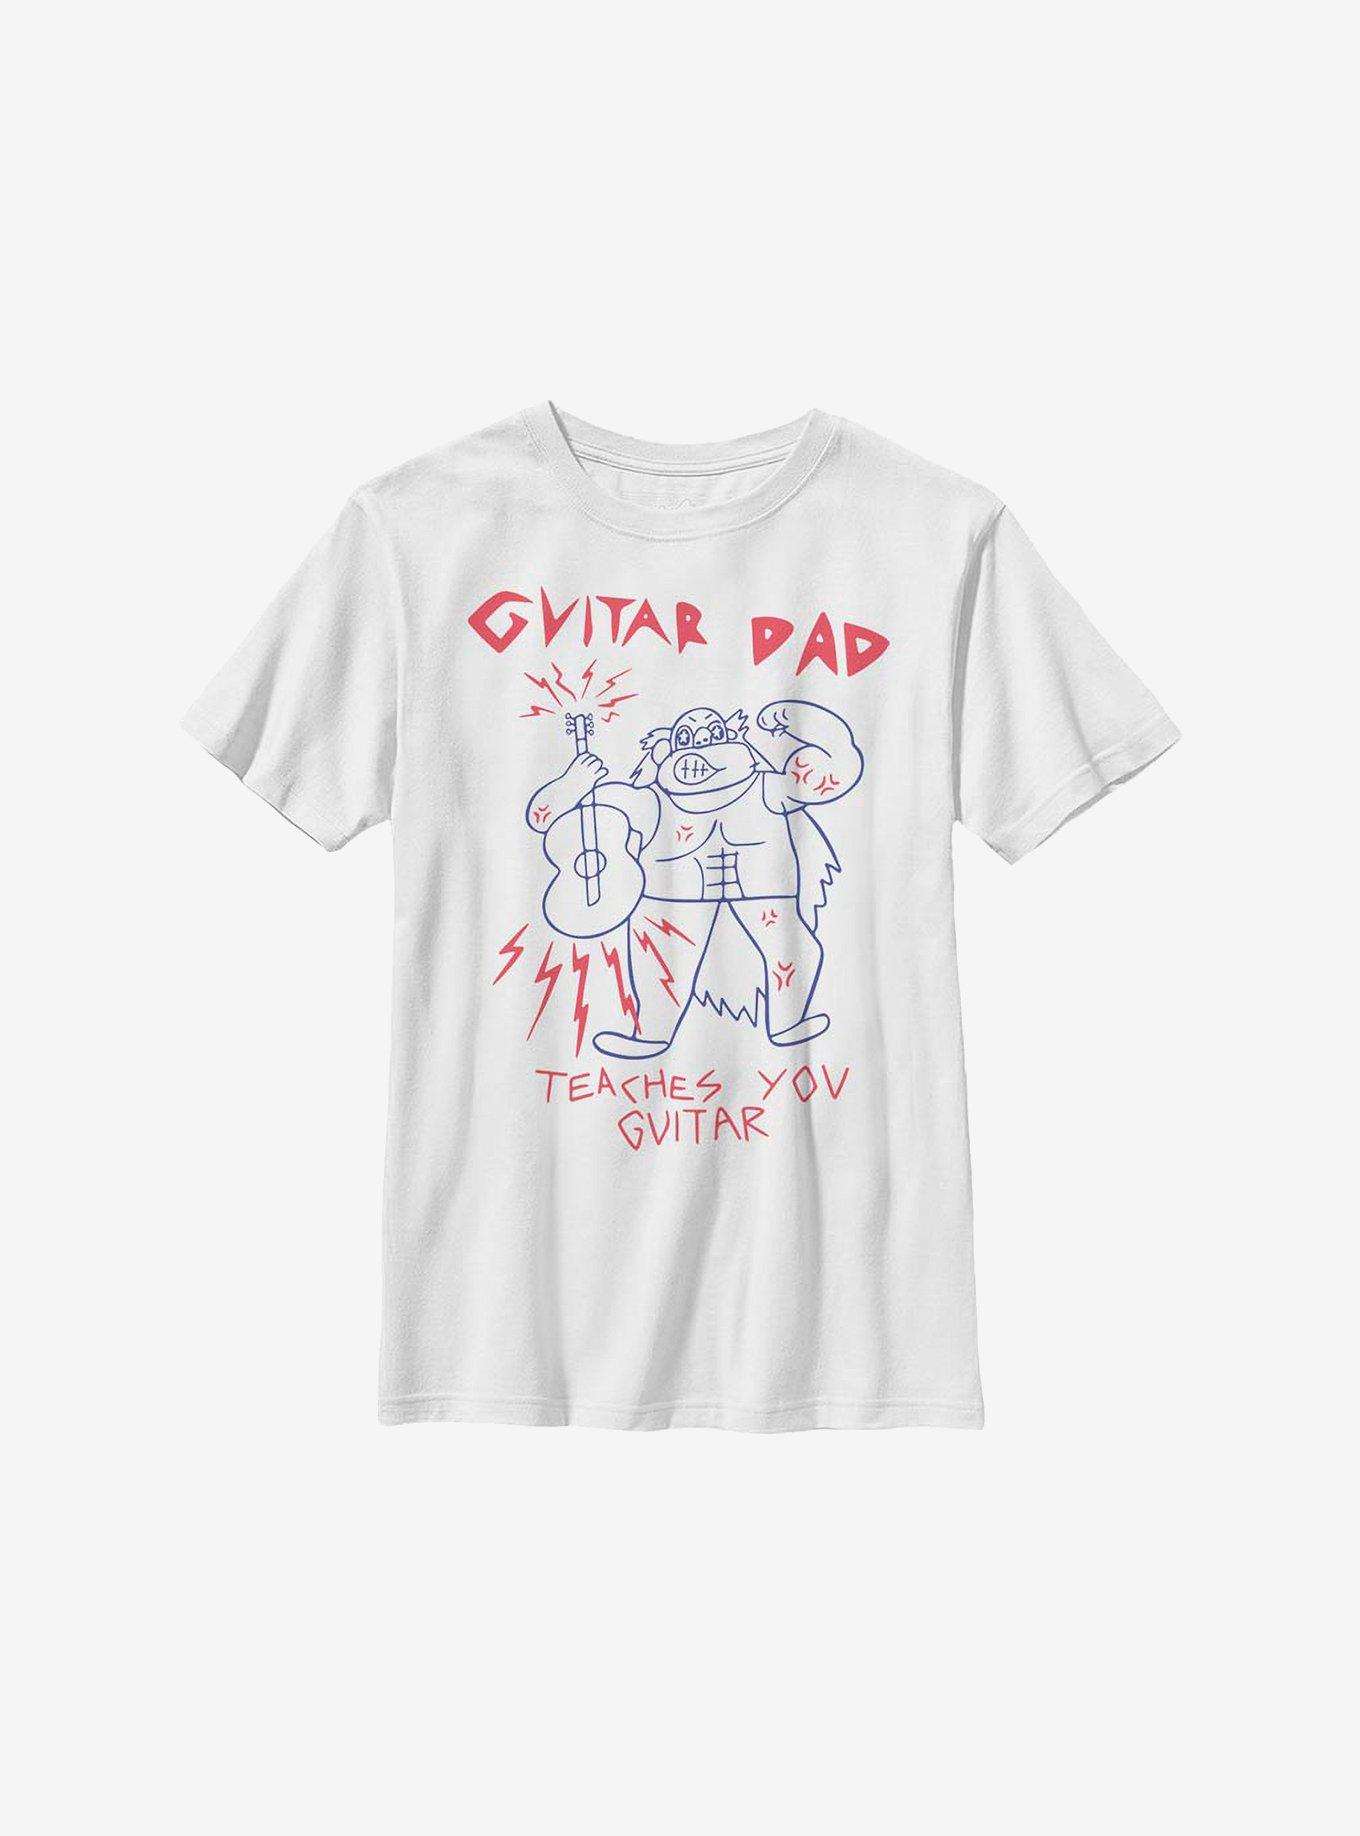 Steven Universe Guitar Dad Youth T-Shirt, WHITE, hi-res